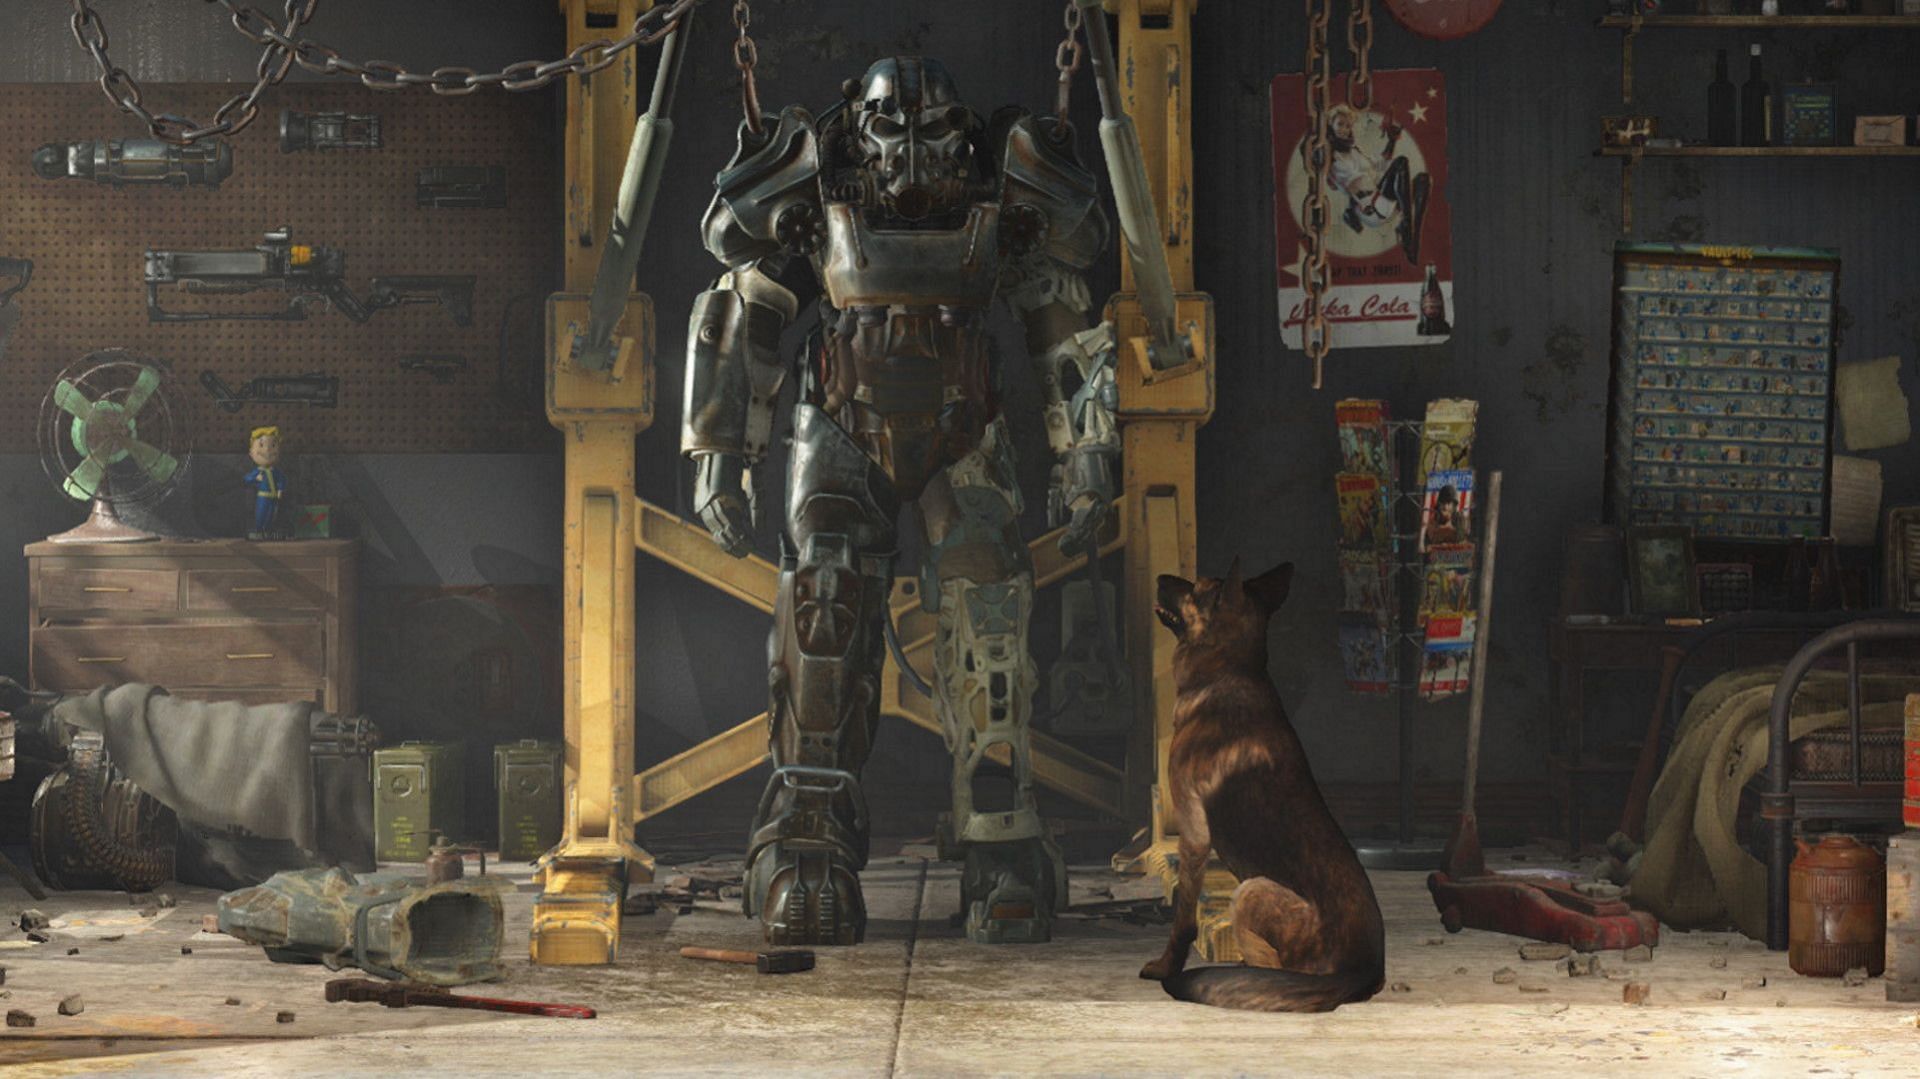 Fallout 4 next-gen update for PS5 and Xbox release date revealed - what